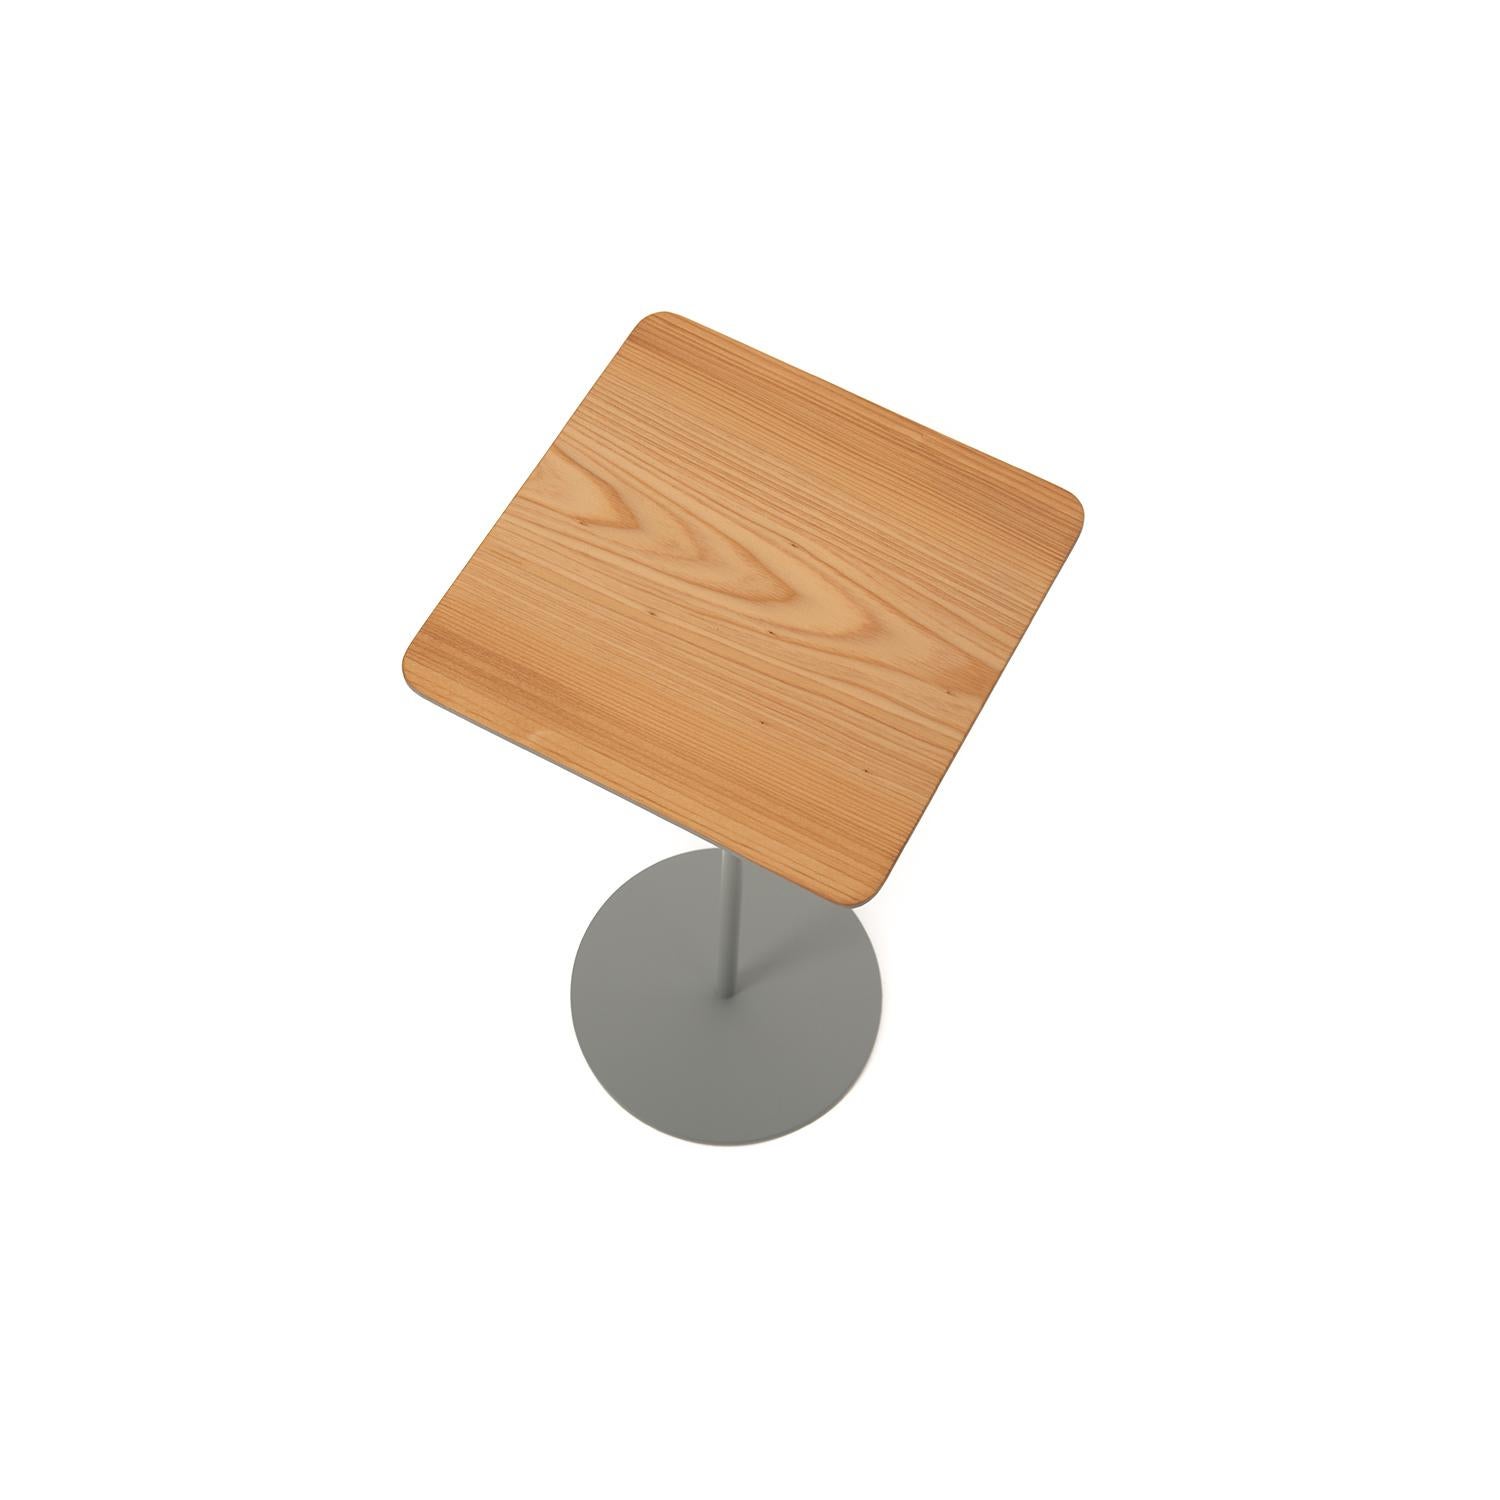 This square top cypress table sits upon a slender, gray stem with a circular base.